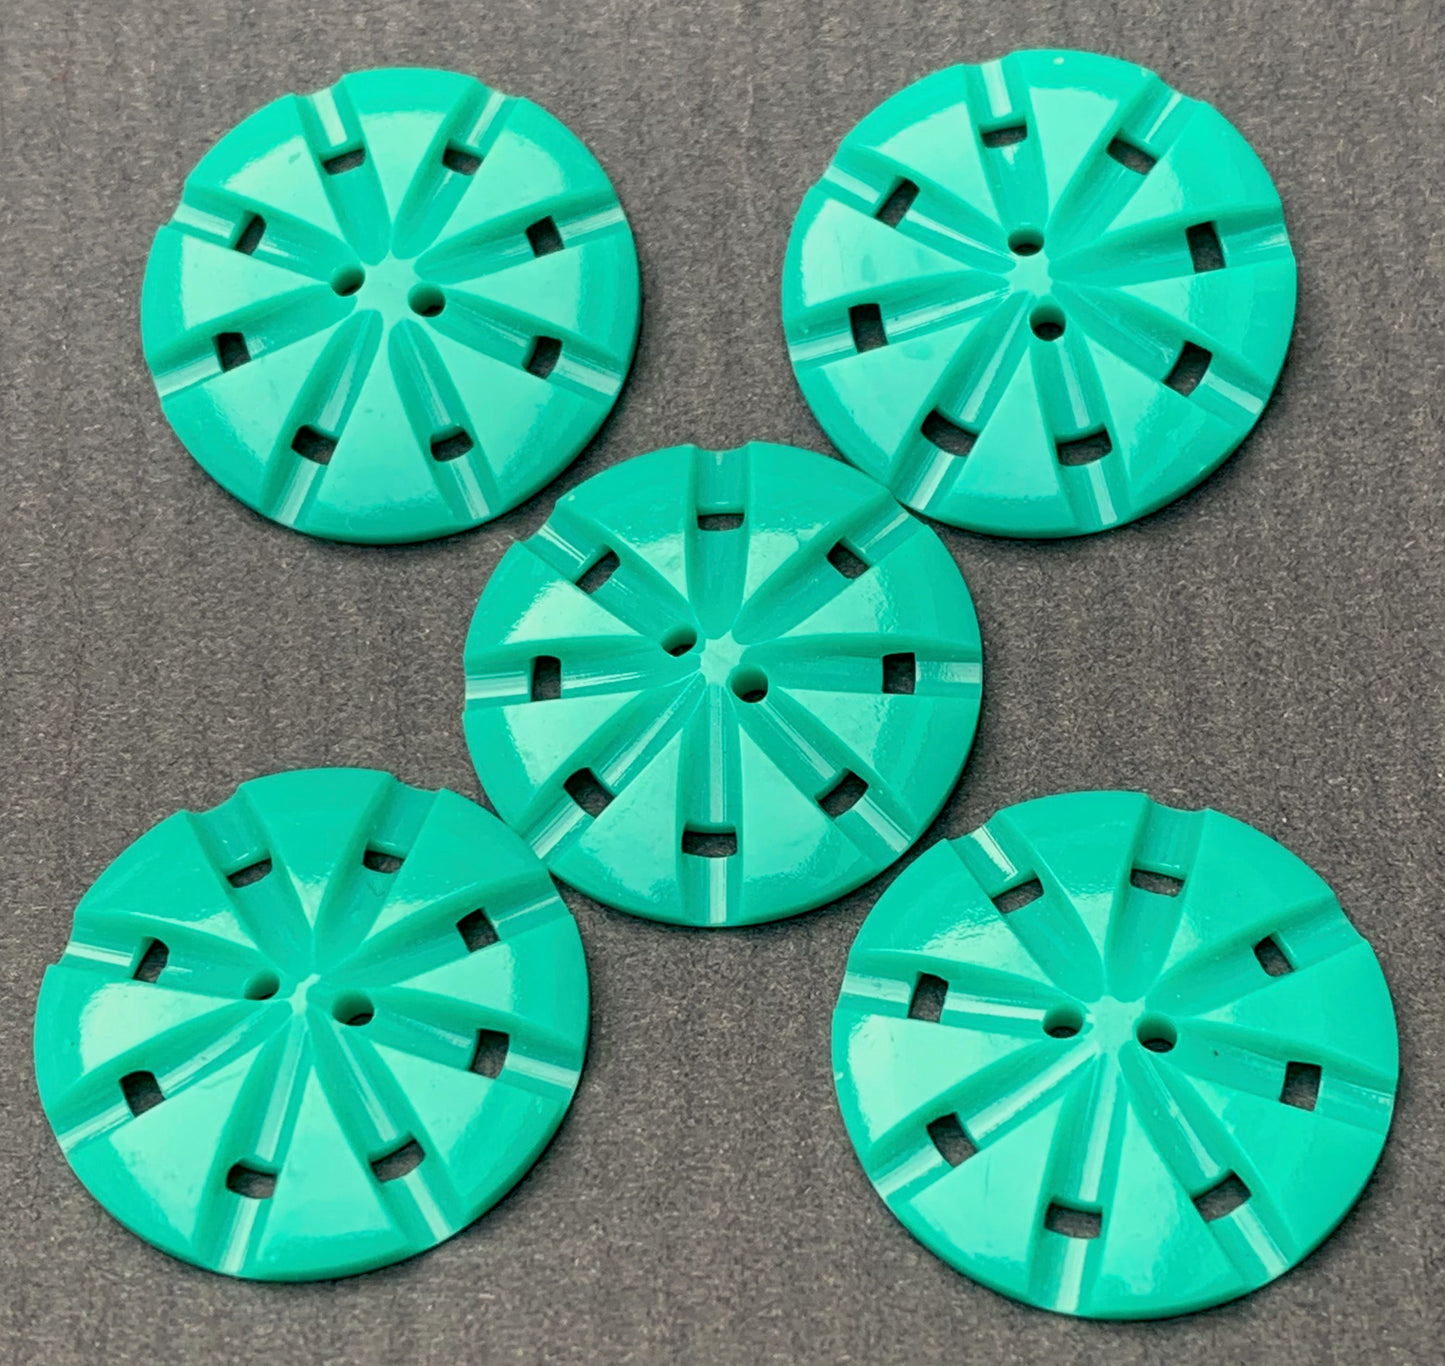 6 Dynamic Vintage Lucite Turquoise Buttons - 2.2cm or 1.8cm wide